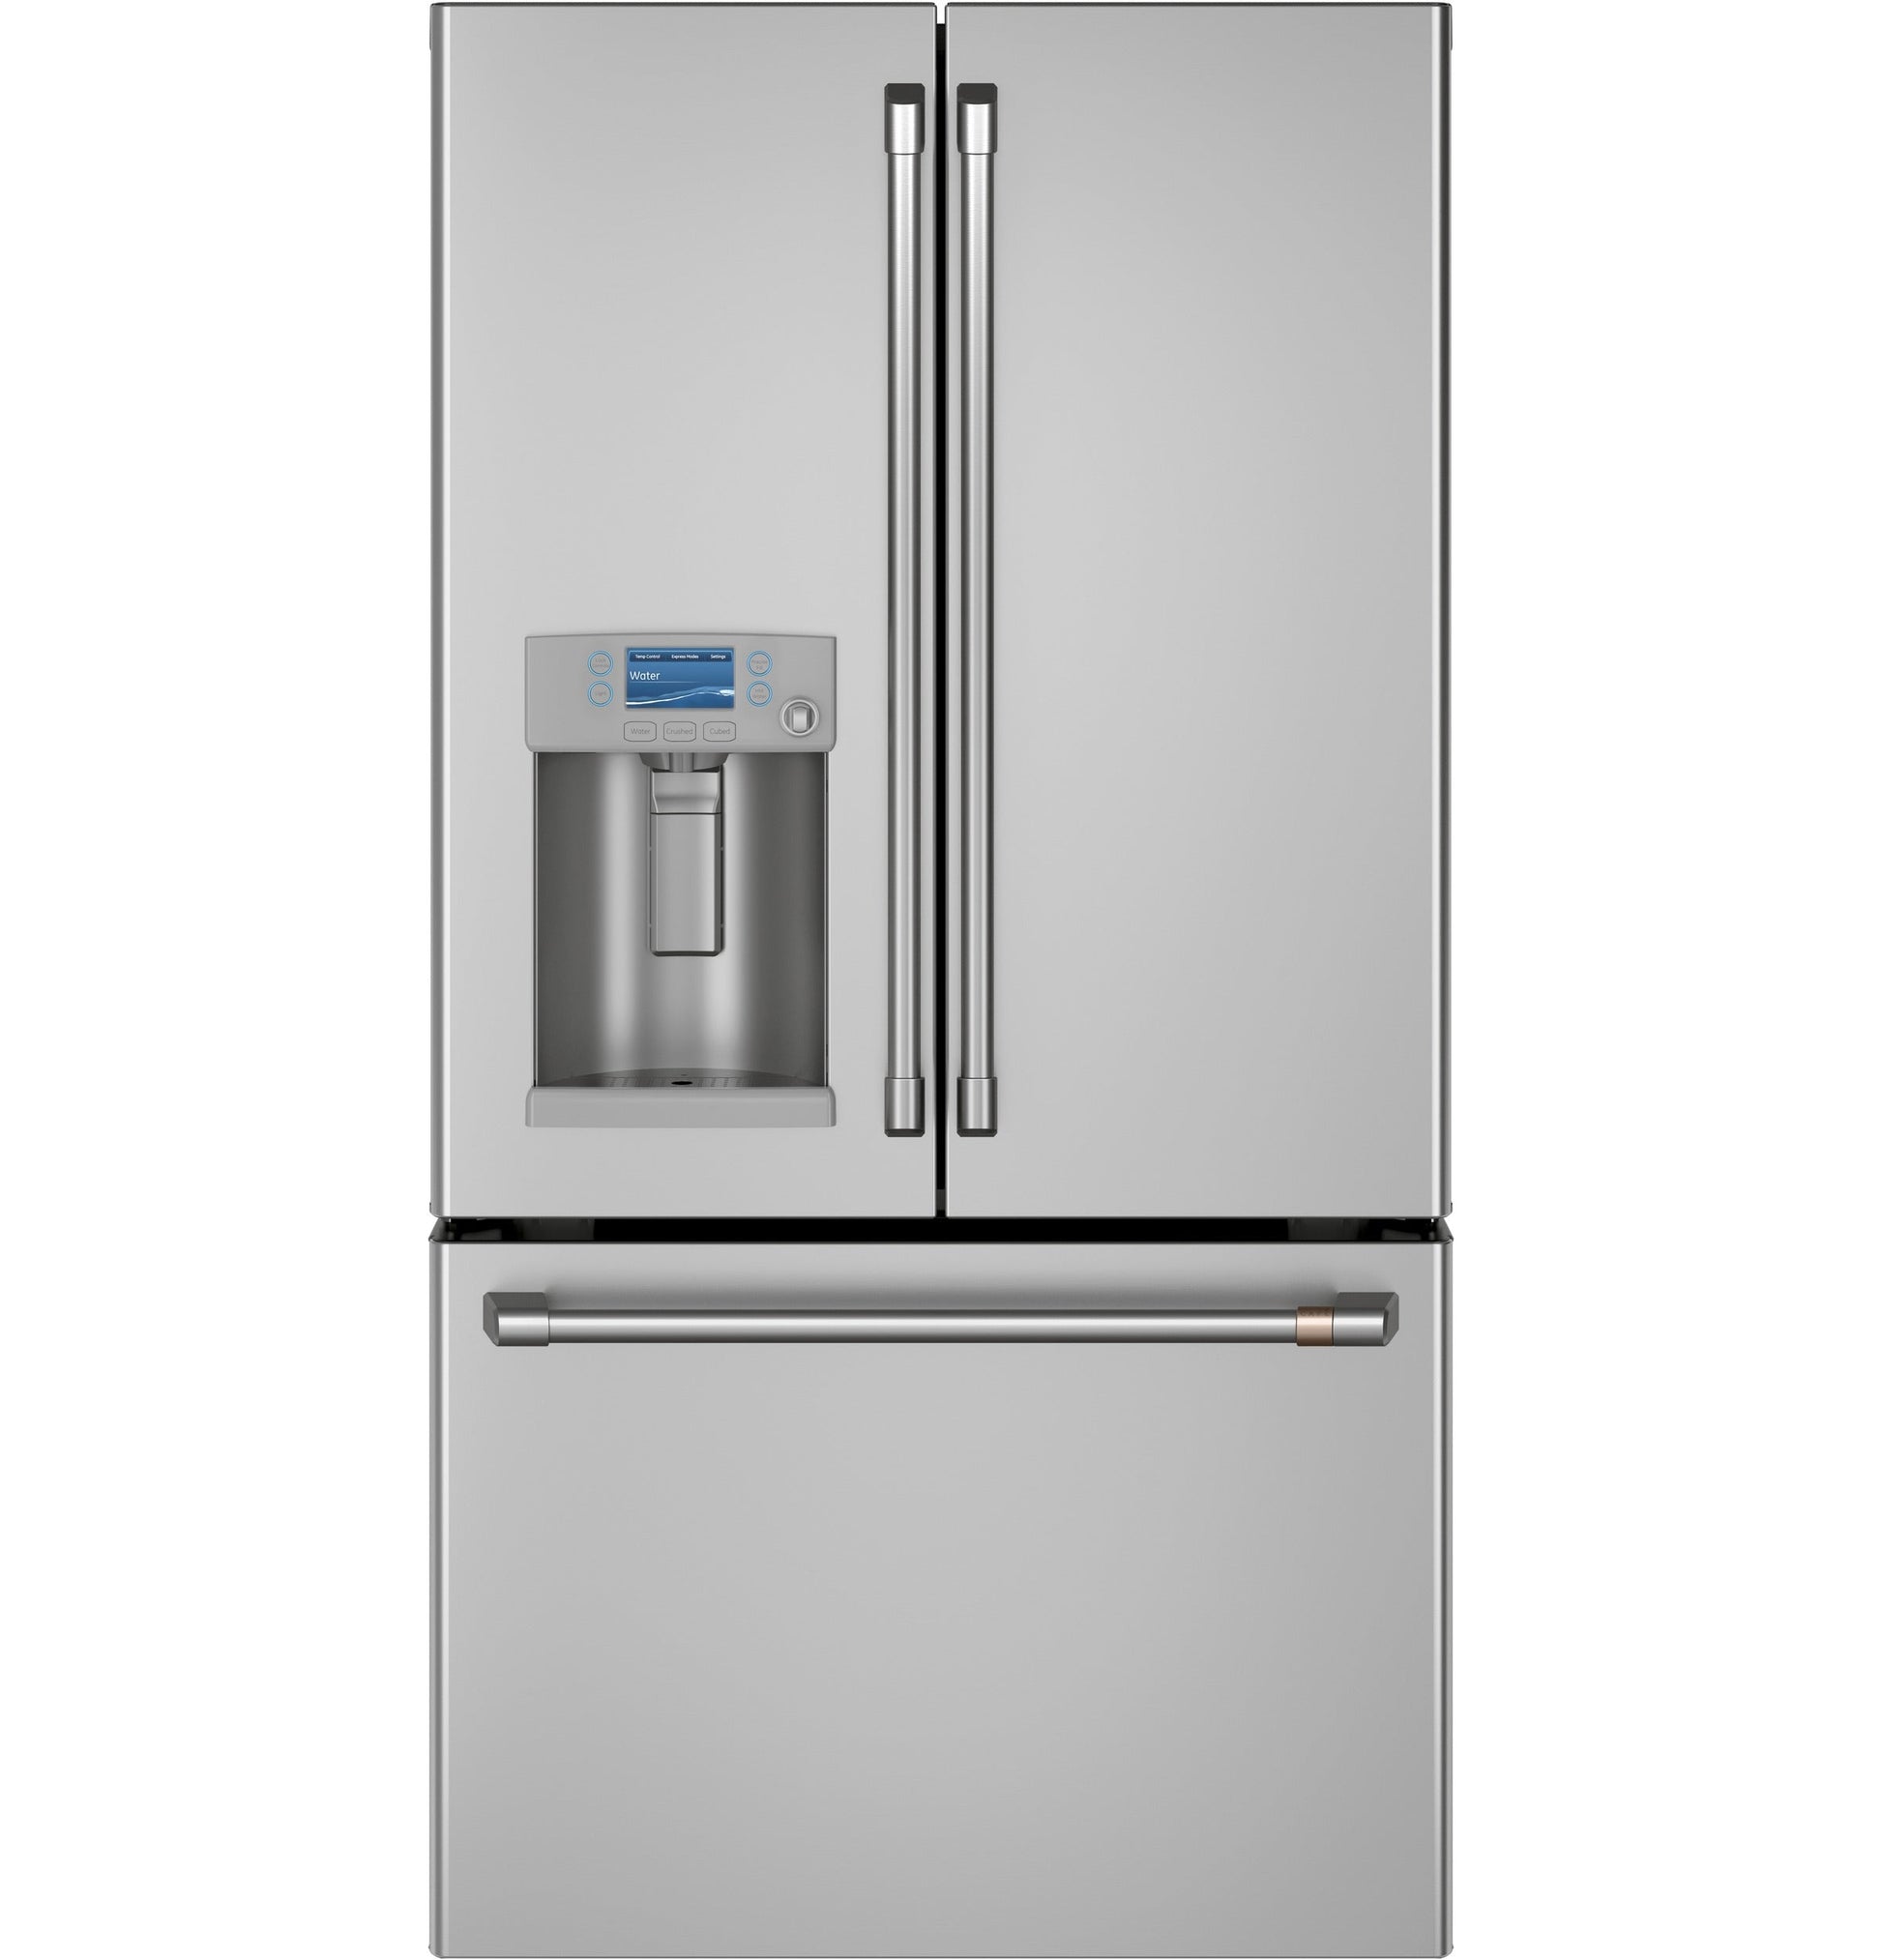 Café 22.2 Cu. Ft. Counter-Depth French-Door Refrigerator with Hot Water Dispenser Stainless Steel - CYE22TP2MS1